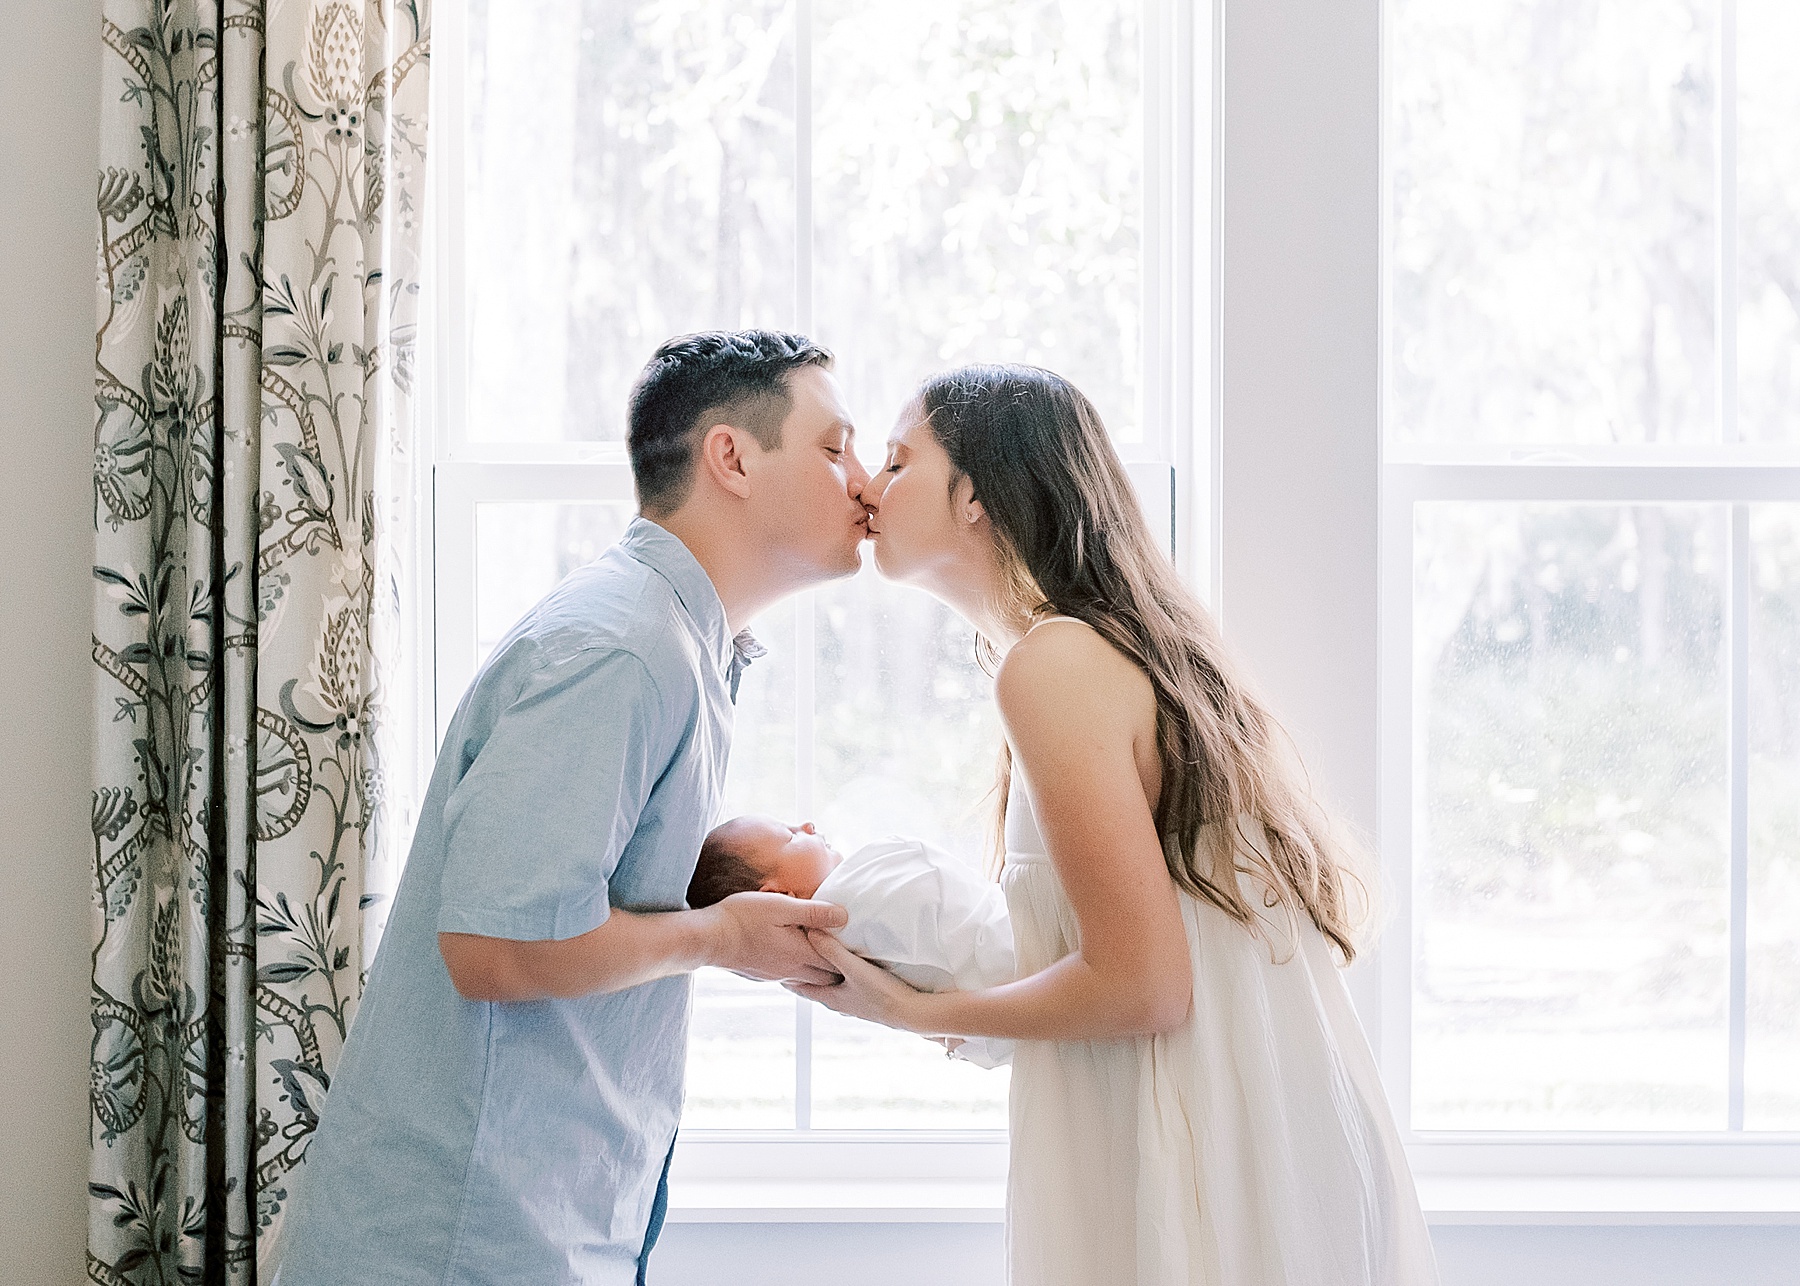 man and woman kissing in front of window while holding newborn baby boy